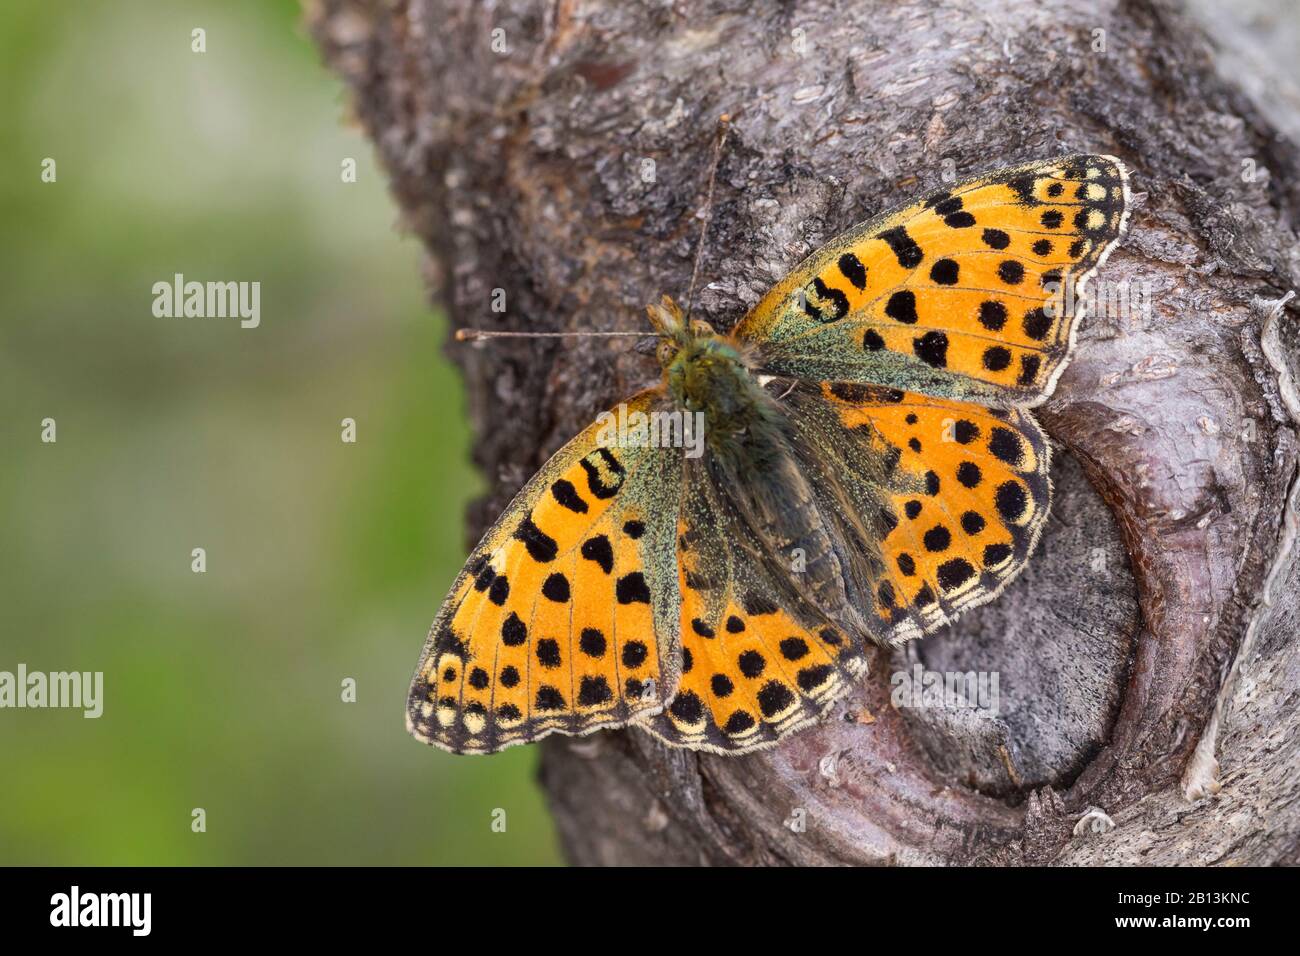 Queen of Spain fritillary (Argynnis lathonia, Issoria lathonia), sits on a tree trunk, Germany Stock Photo